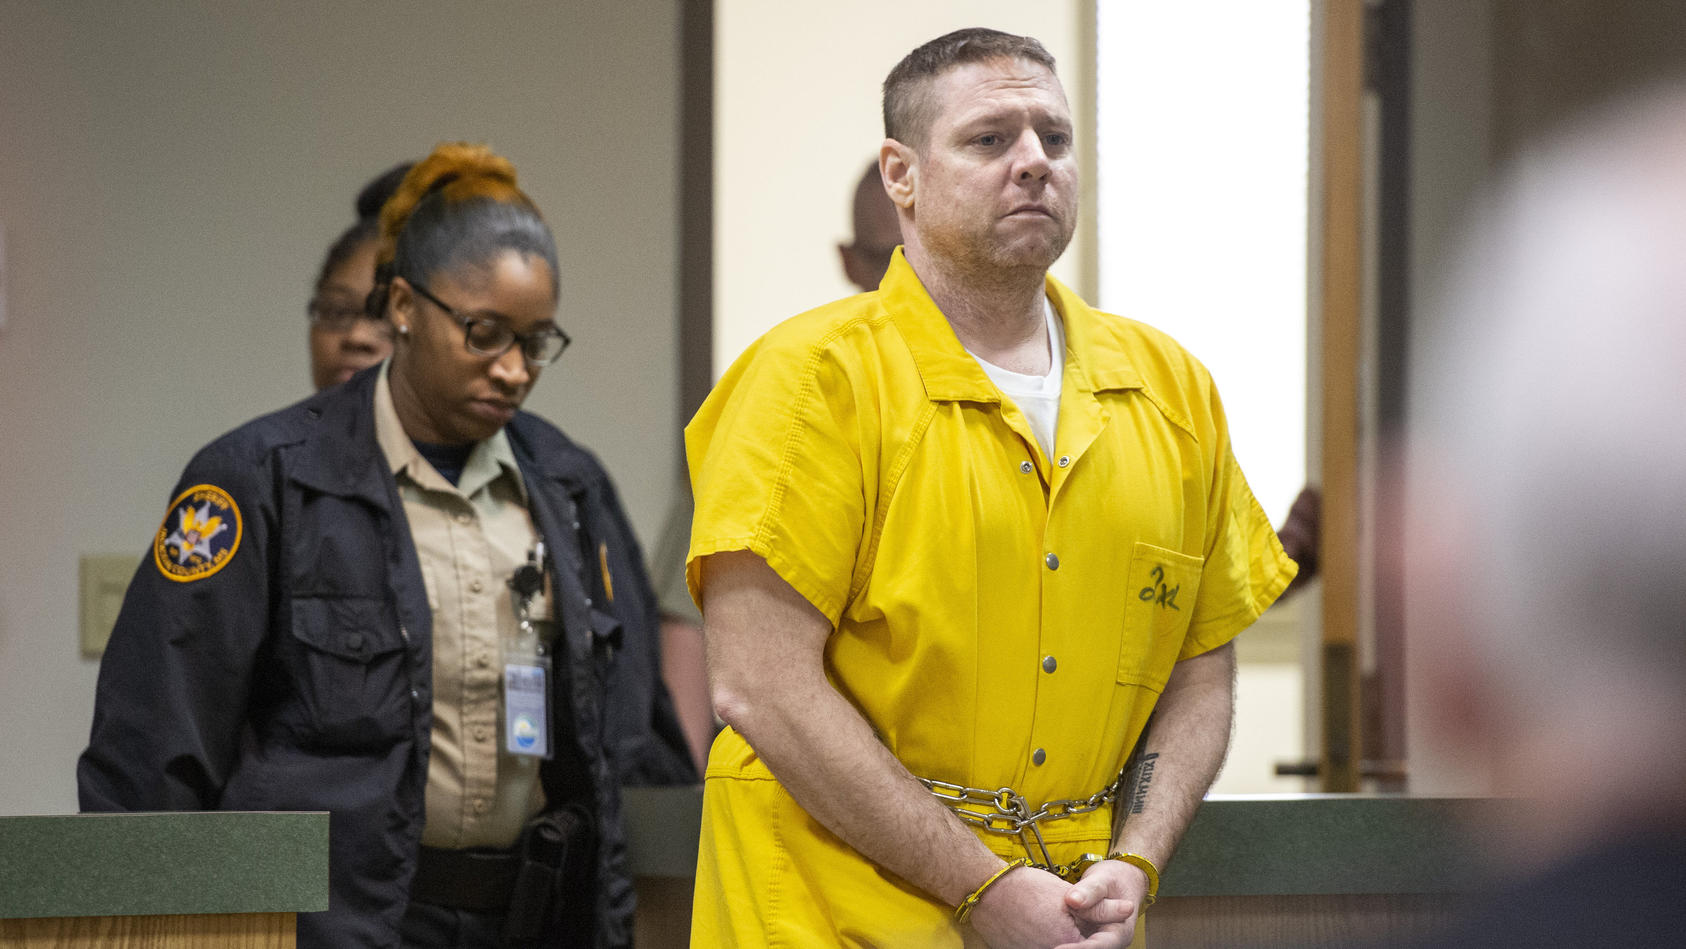 Jacob Blair Scott is led into the courtroom for his sentencing hearing following a trial in which the jury gave its verdict that Scott was guilty on all charges in Jackson County Circuit Court in Pascagoula, Miss., on Thursday, June 2, 2022. Scott, c